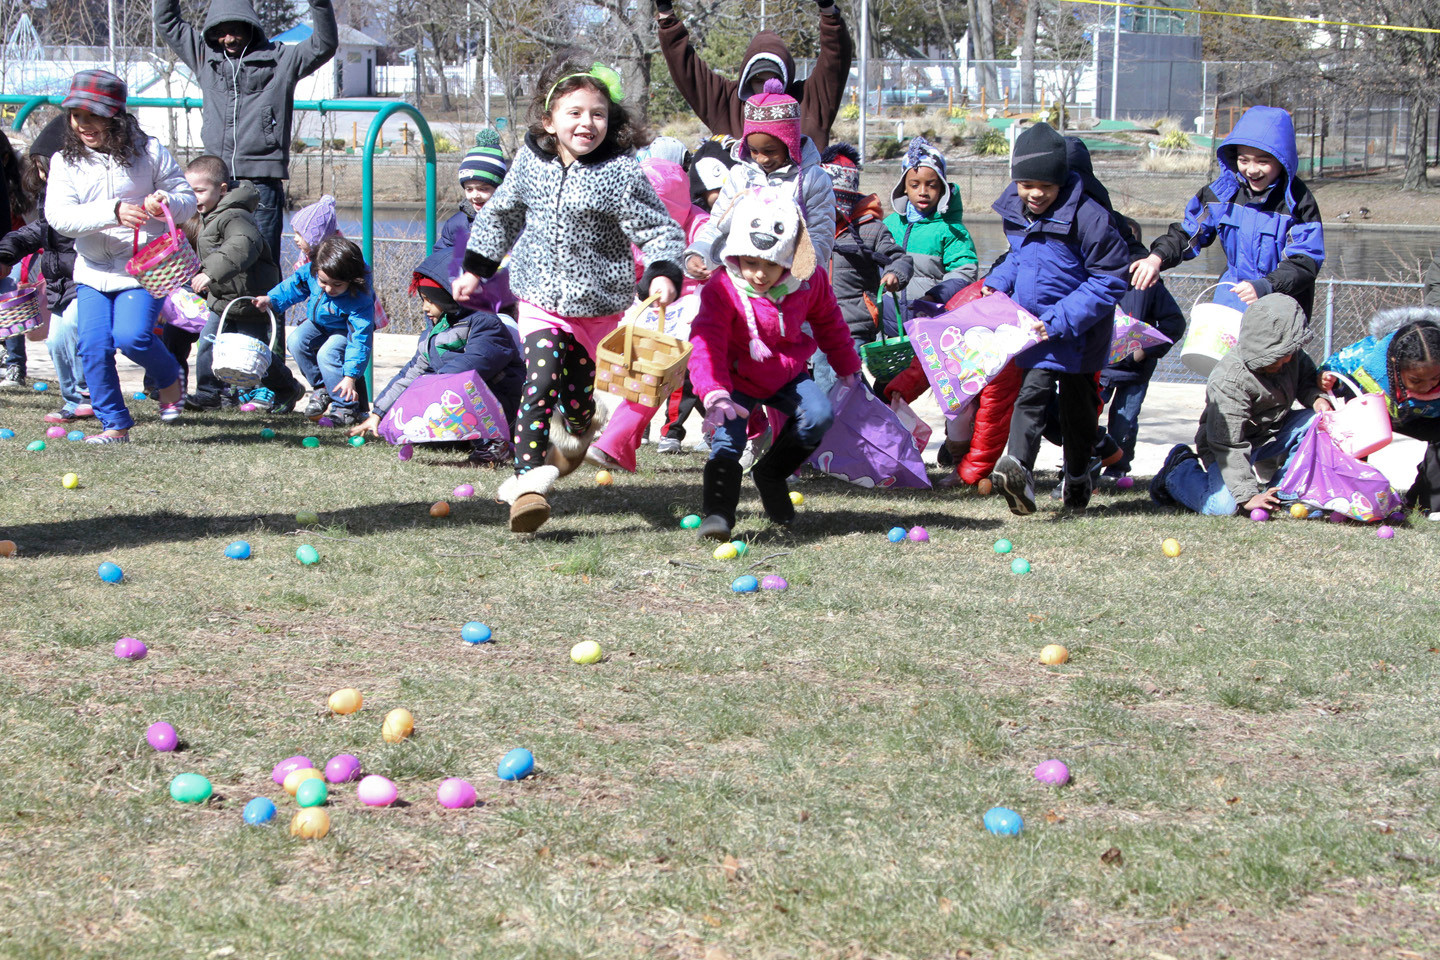 There were Eggs as far as the eye could see, until children scooped them all up, at Hendrickson Park last Saturday for the village’s annual Easter egg hunt hosted by the Recreation Department.